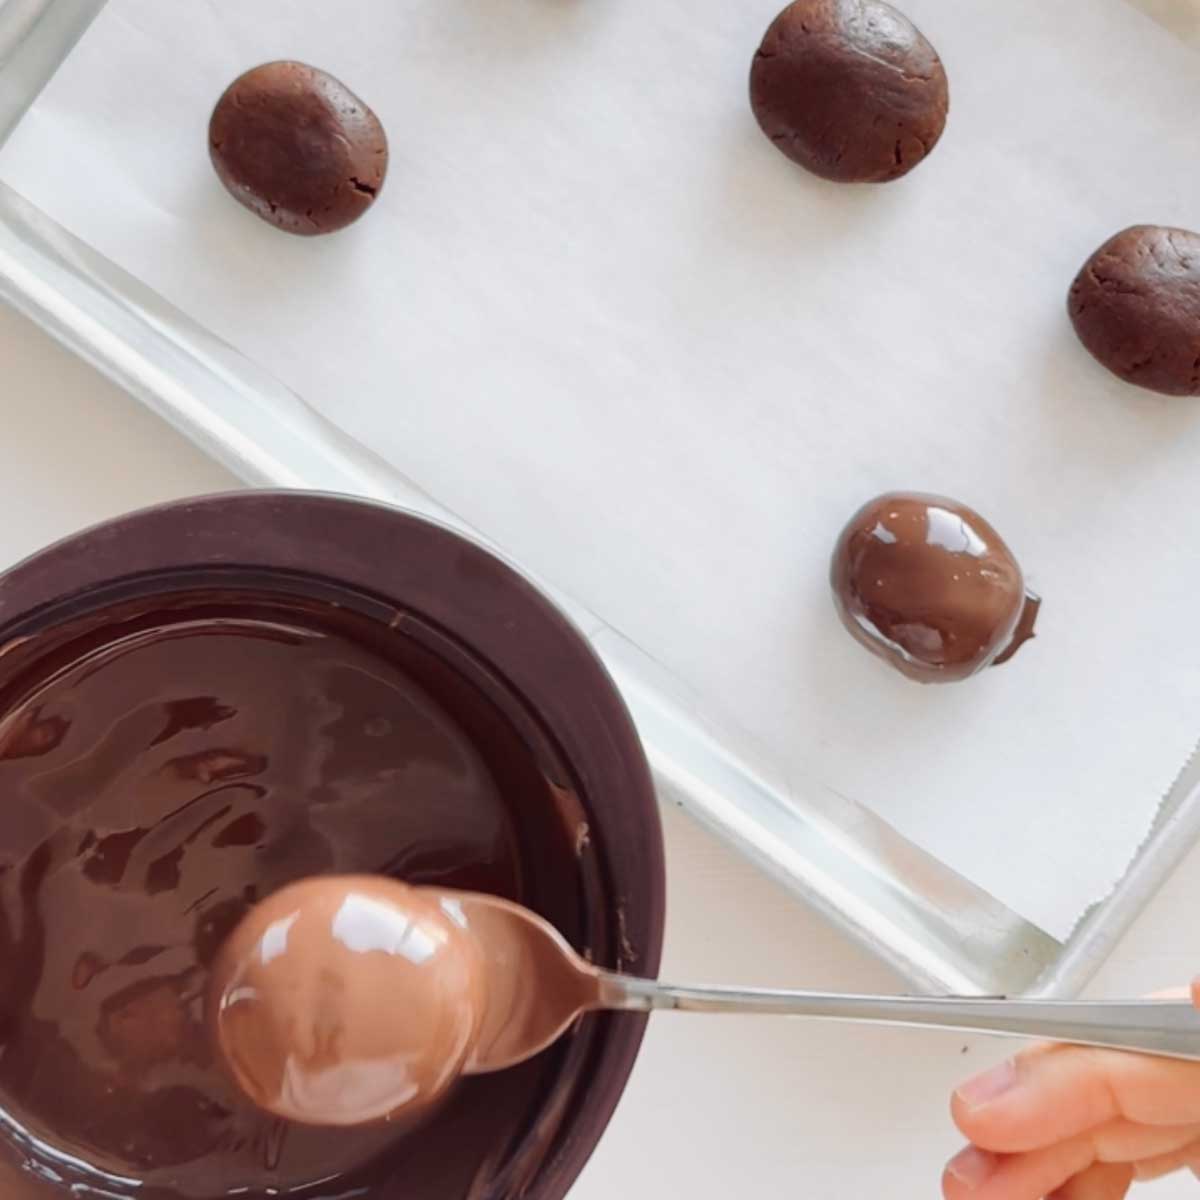 Healthier Nutella Chocolate Easter Eggs Made with PB Powder - Ricotta Almond Easter Eggs